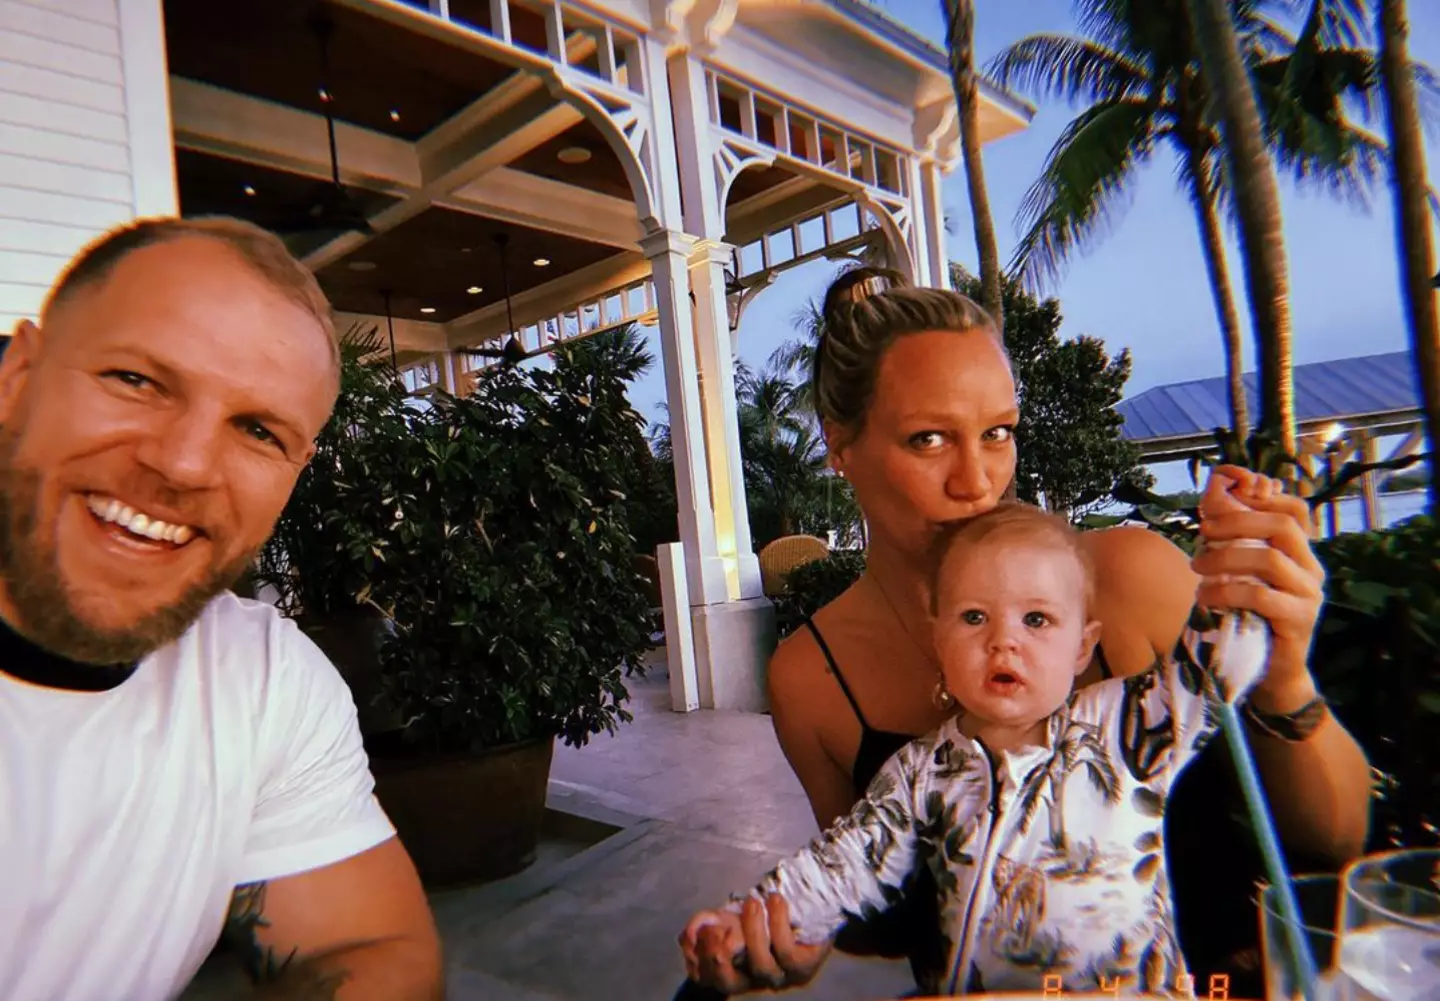 James, Chloe and their daughter Bodhi.